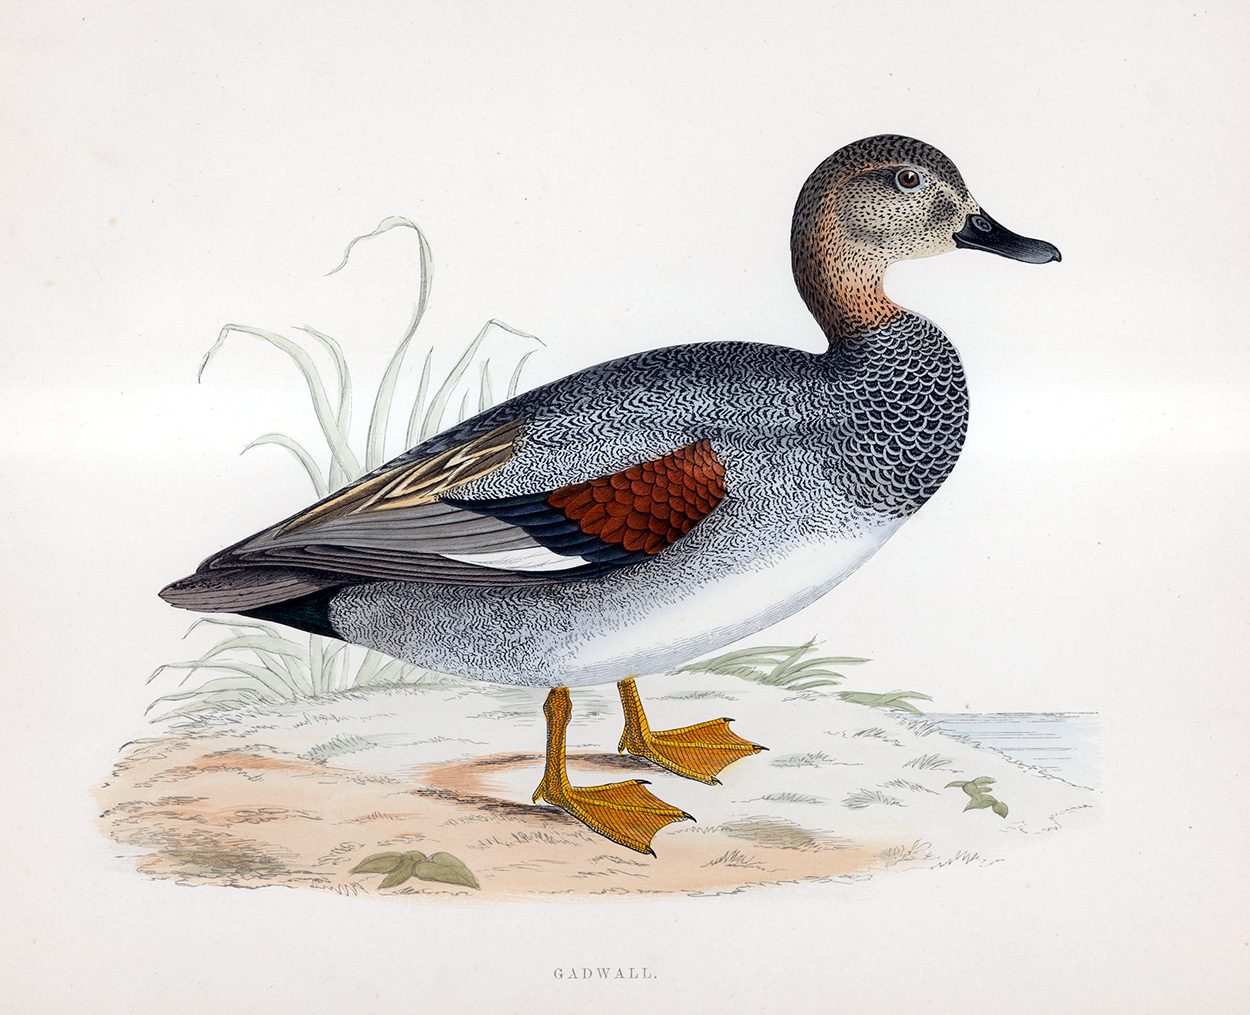 Gadwall - hand coloured lithograph 1891 (Print) art by Beverley R Morris at The Illustration Art Gallery